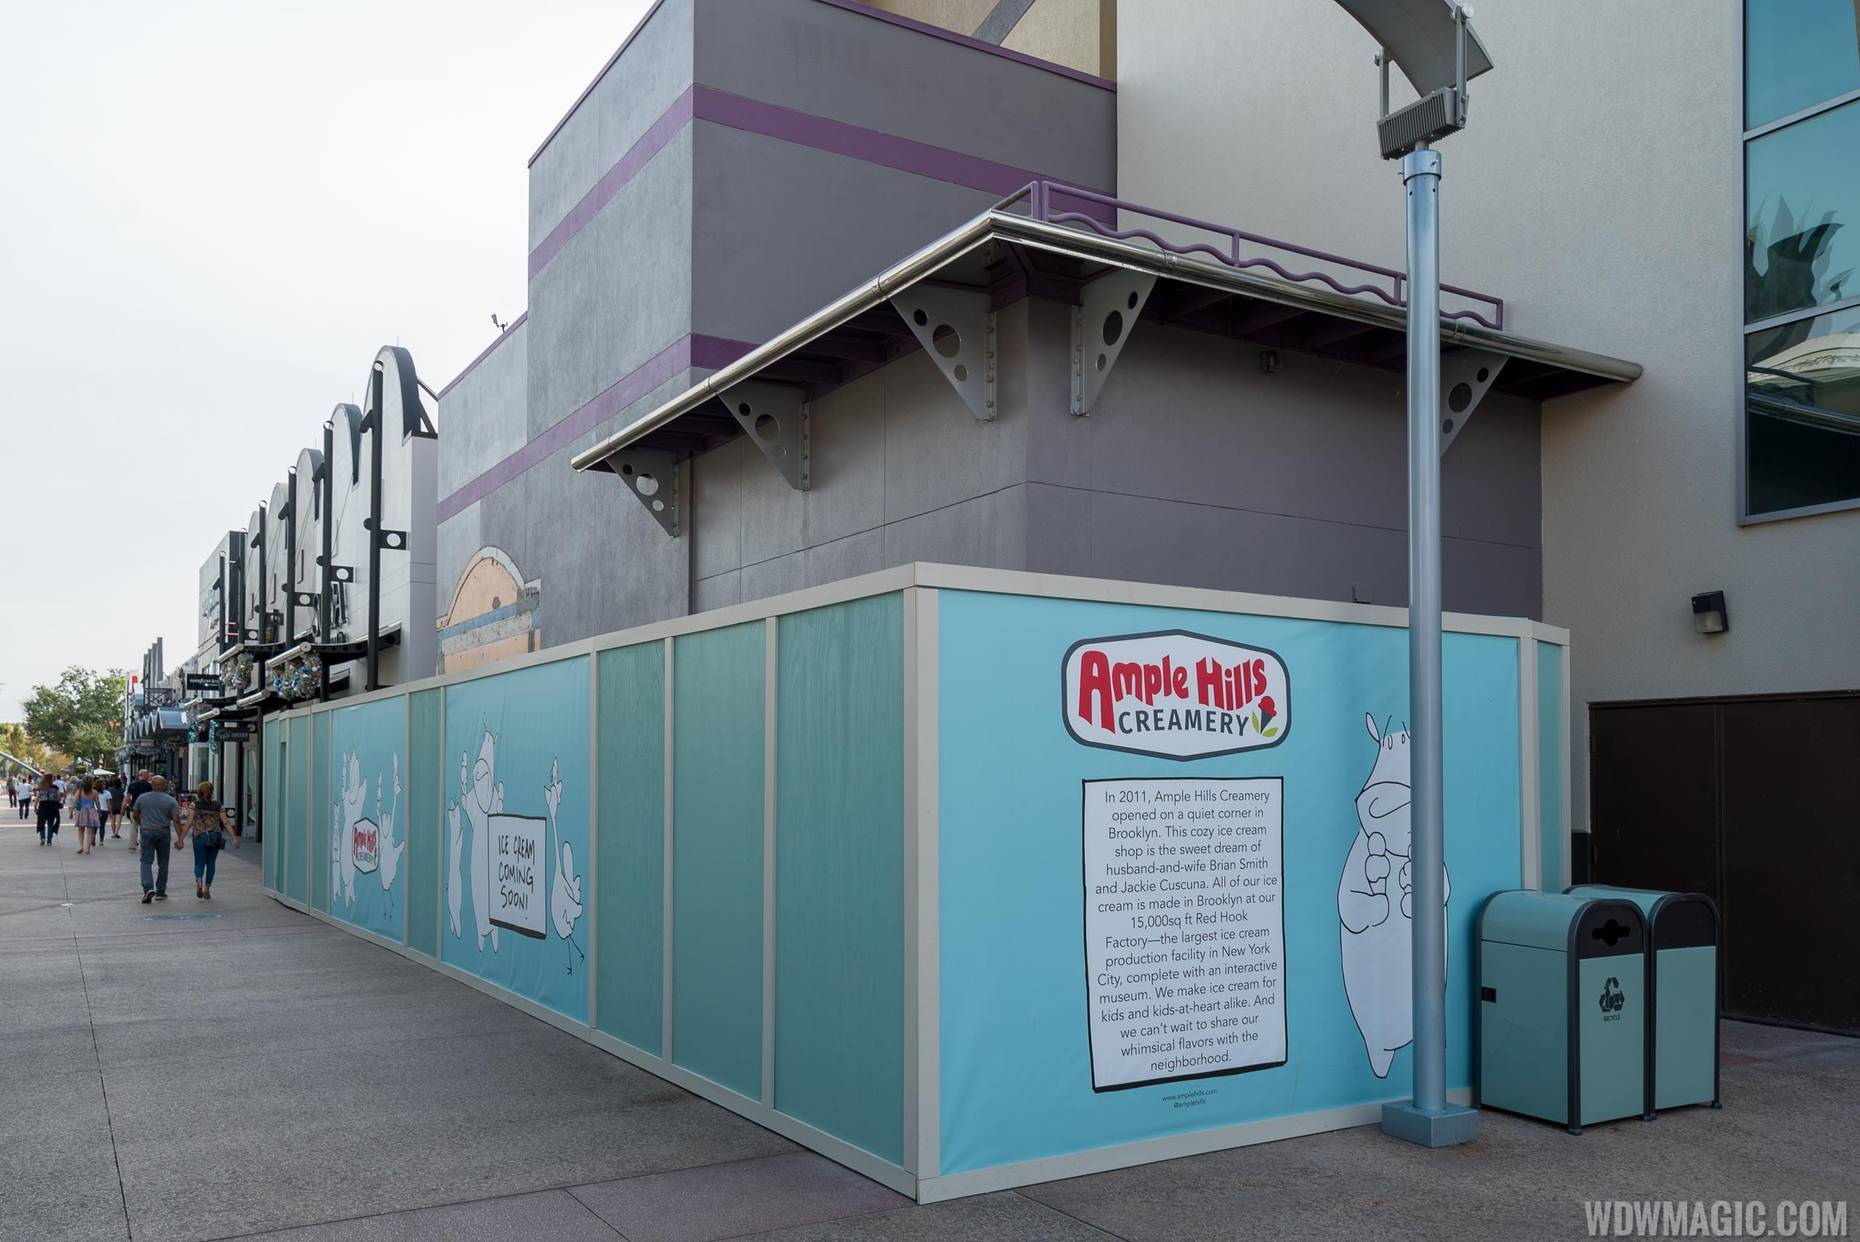 Permit filed for Salt and Straw construction at Disney Springs